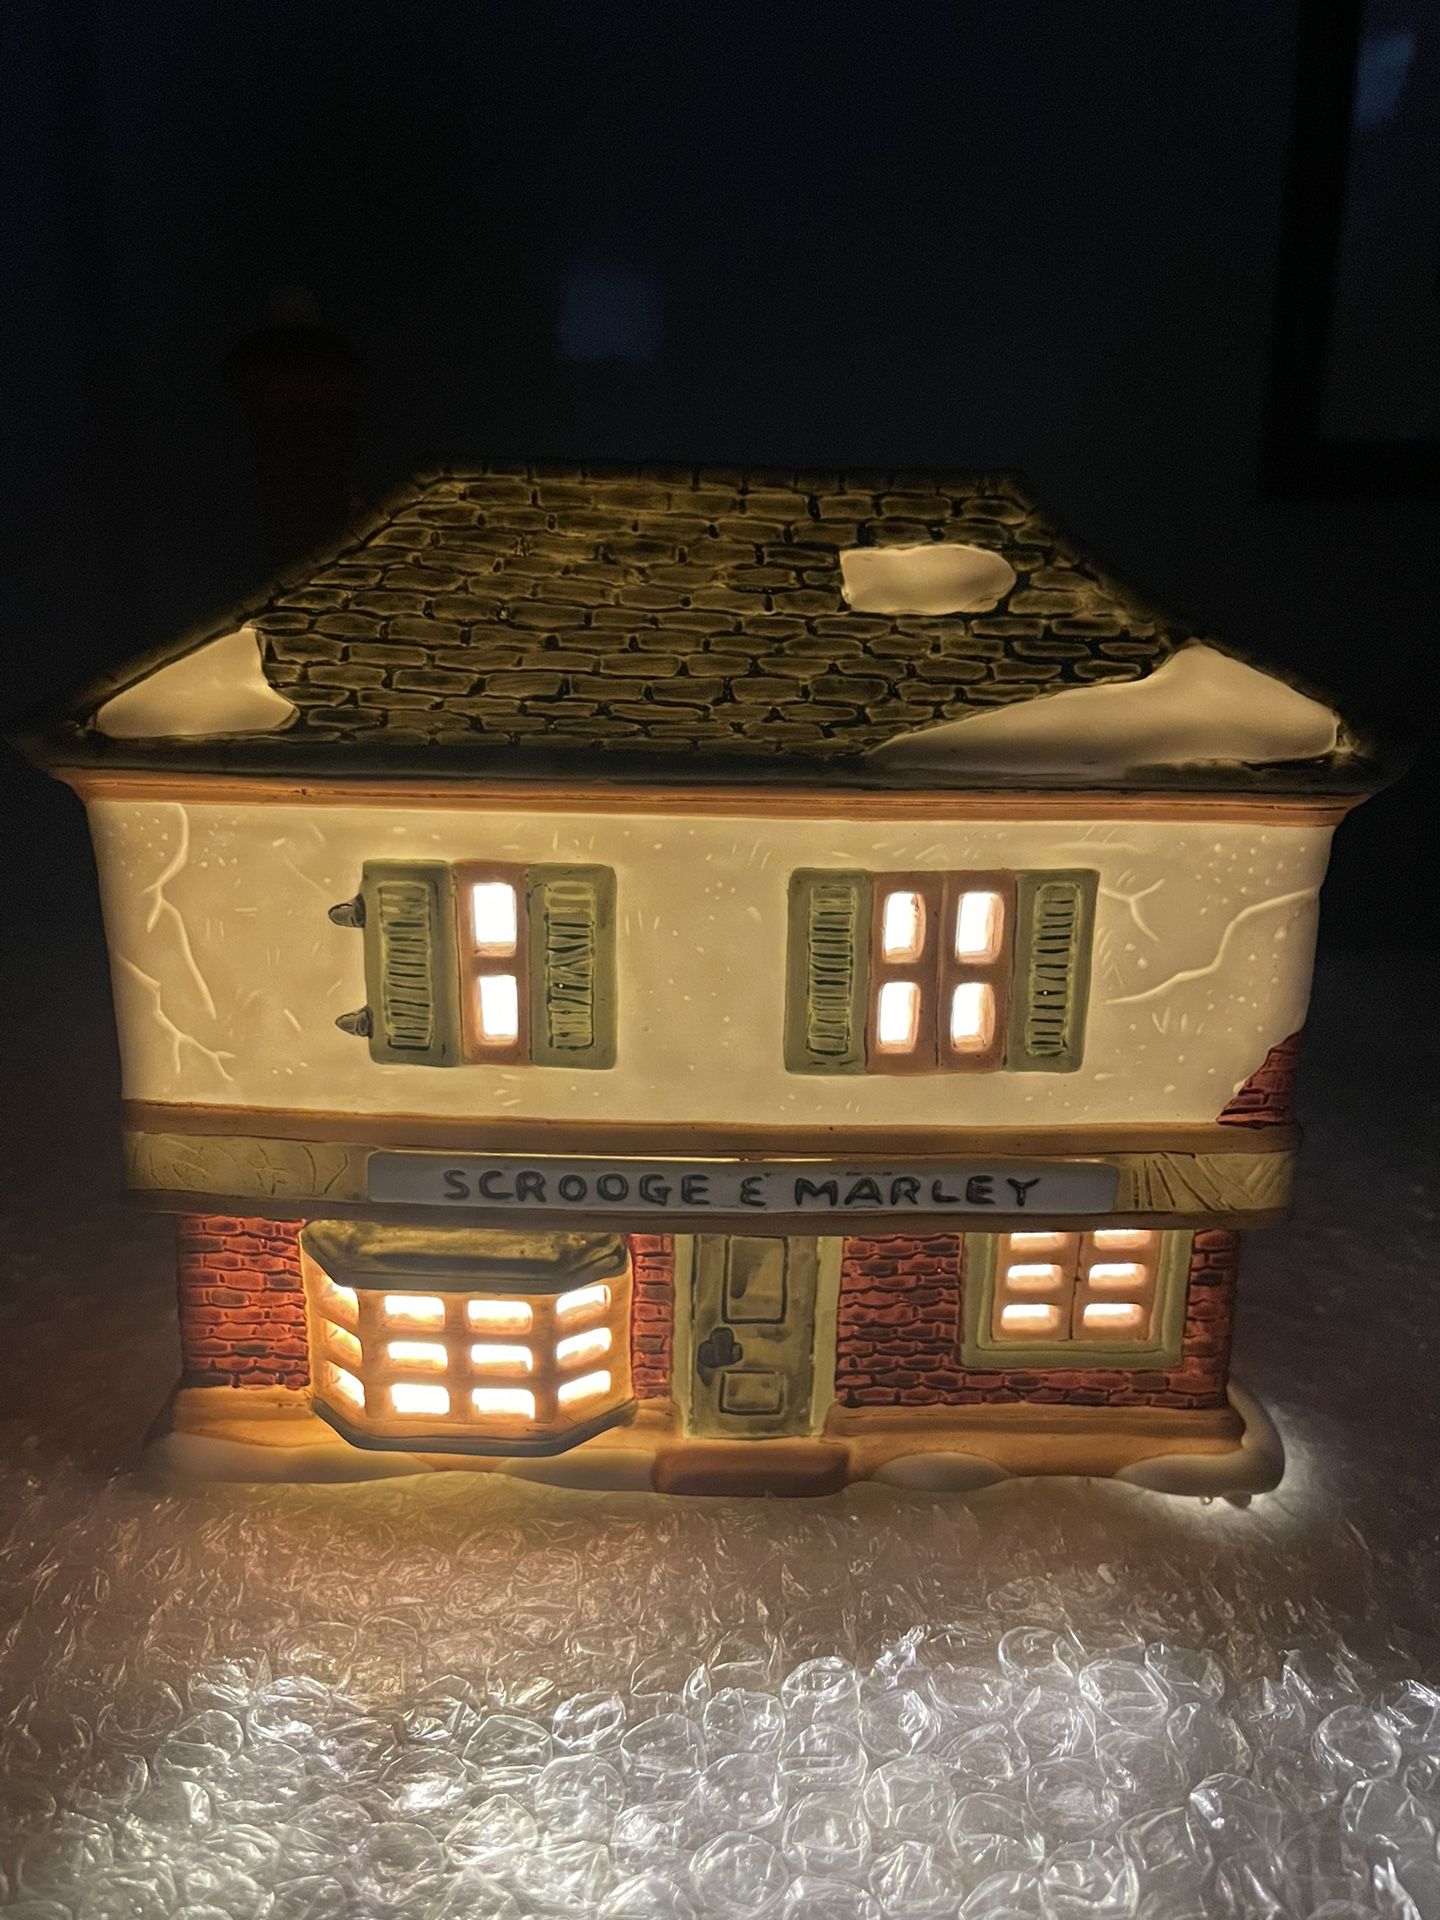 Department 56 Dickens Village "Scrooge and Marley Counting House" #65005